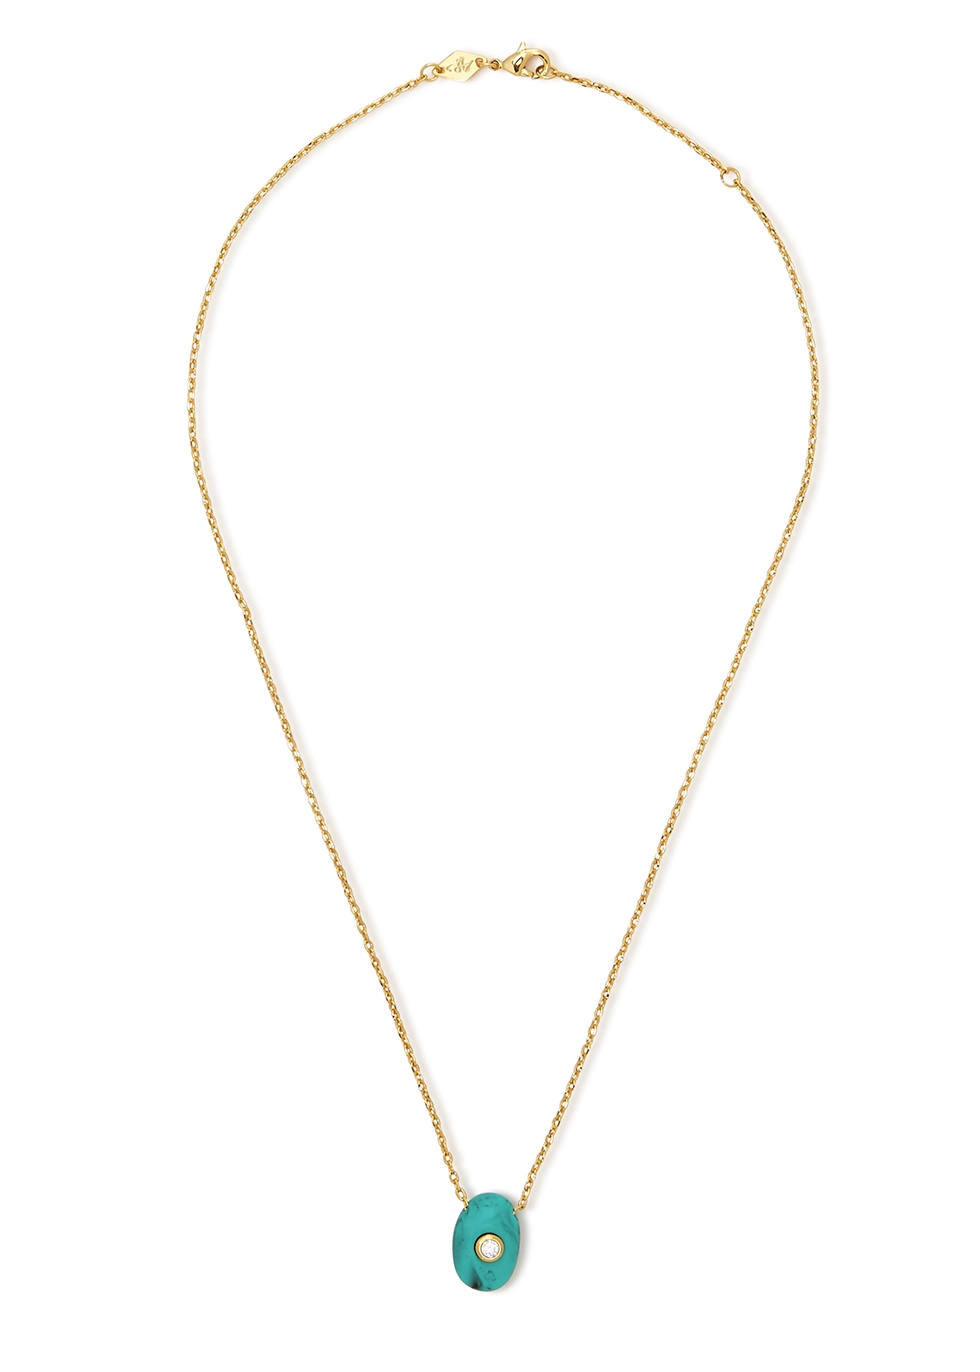 ANNI LU PETIT PEBBLE 18KT GOLD-PLATED NECKLACE